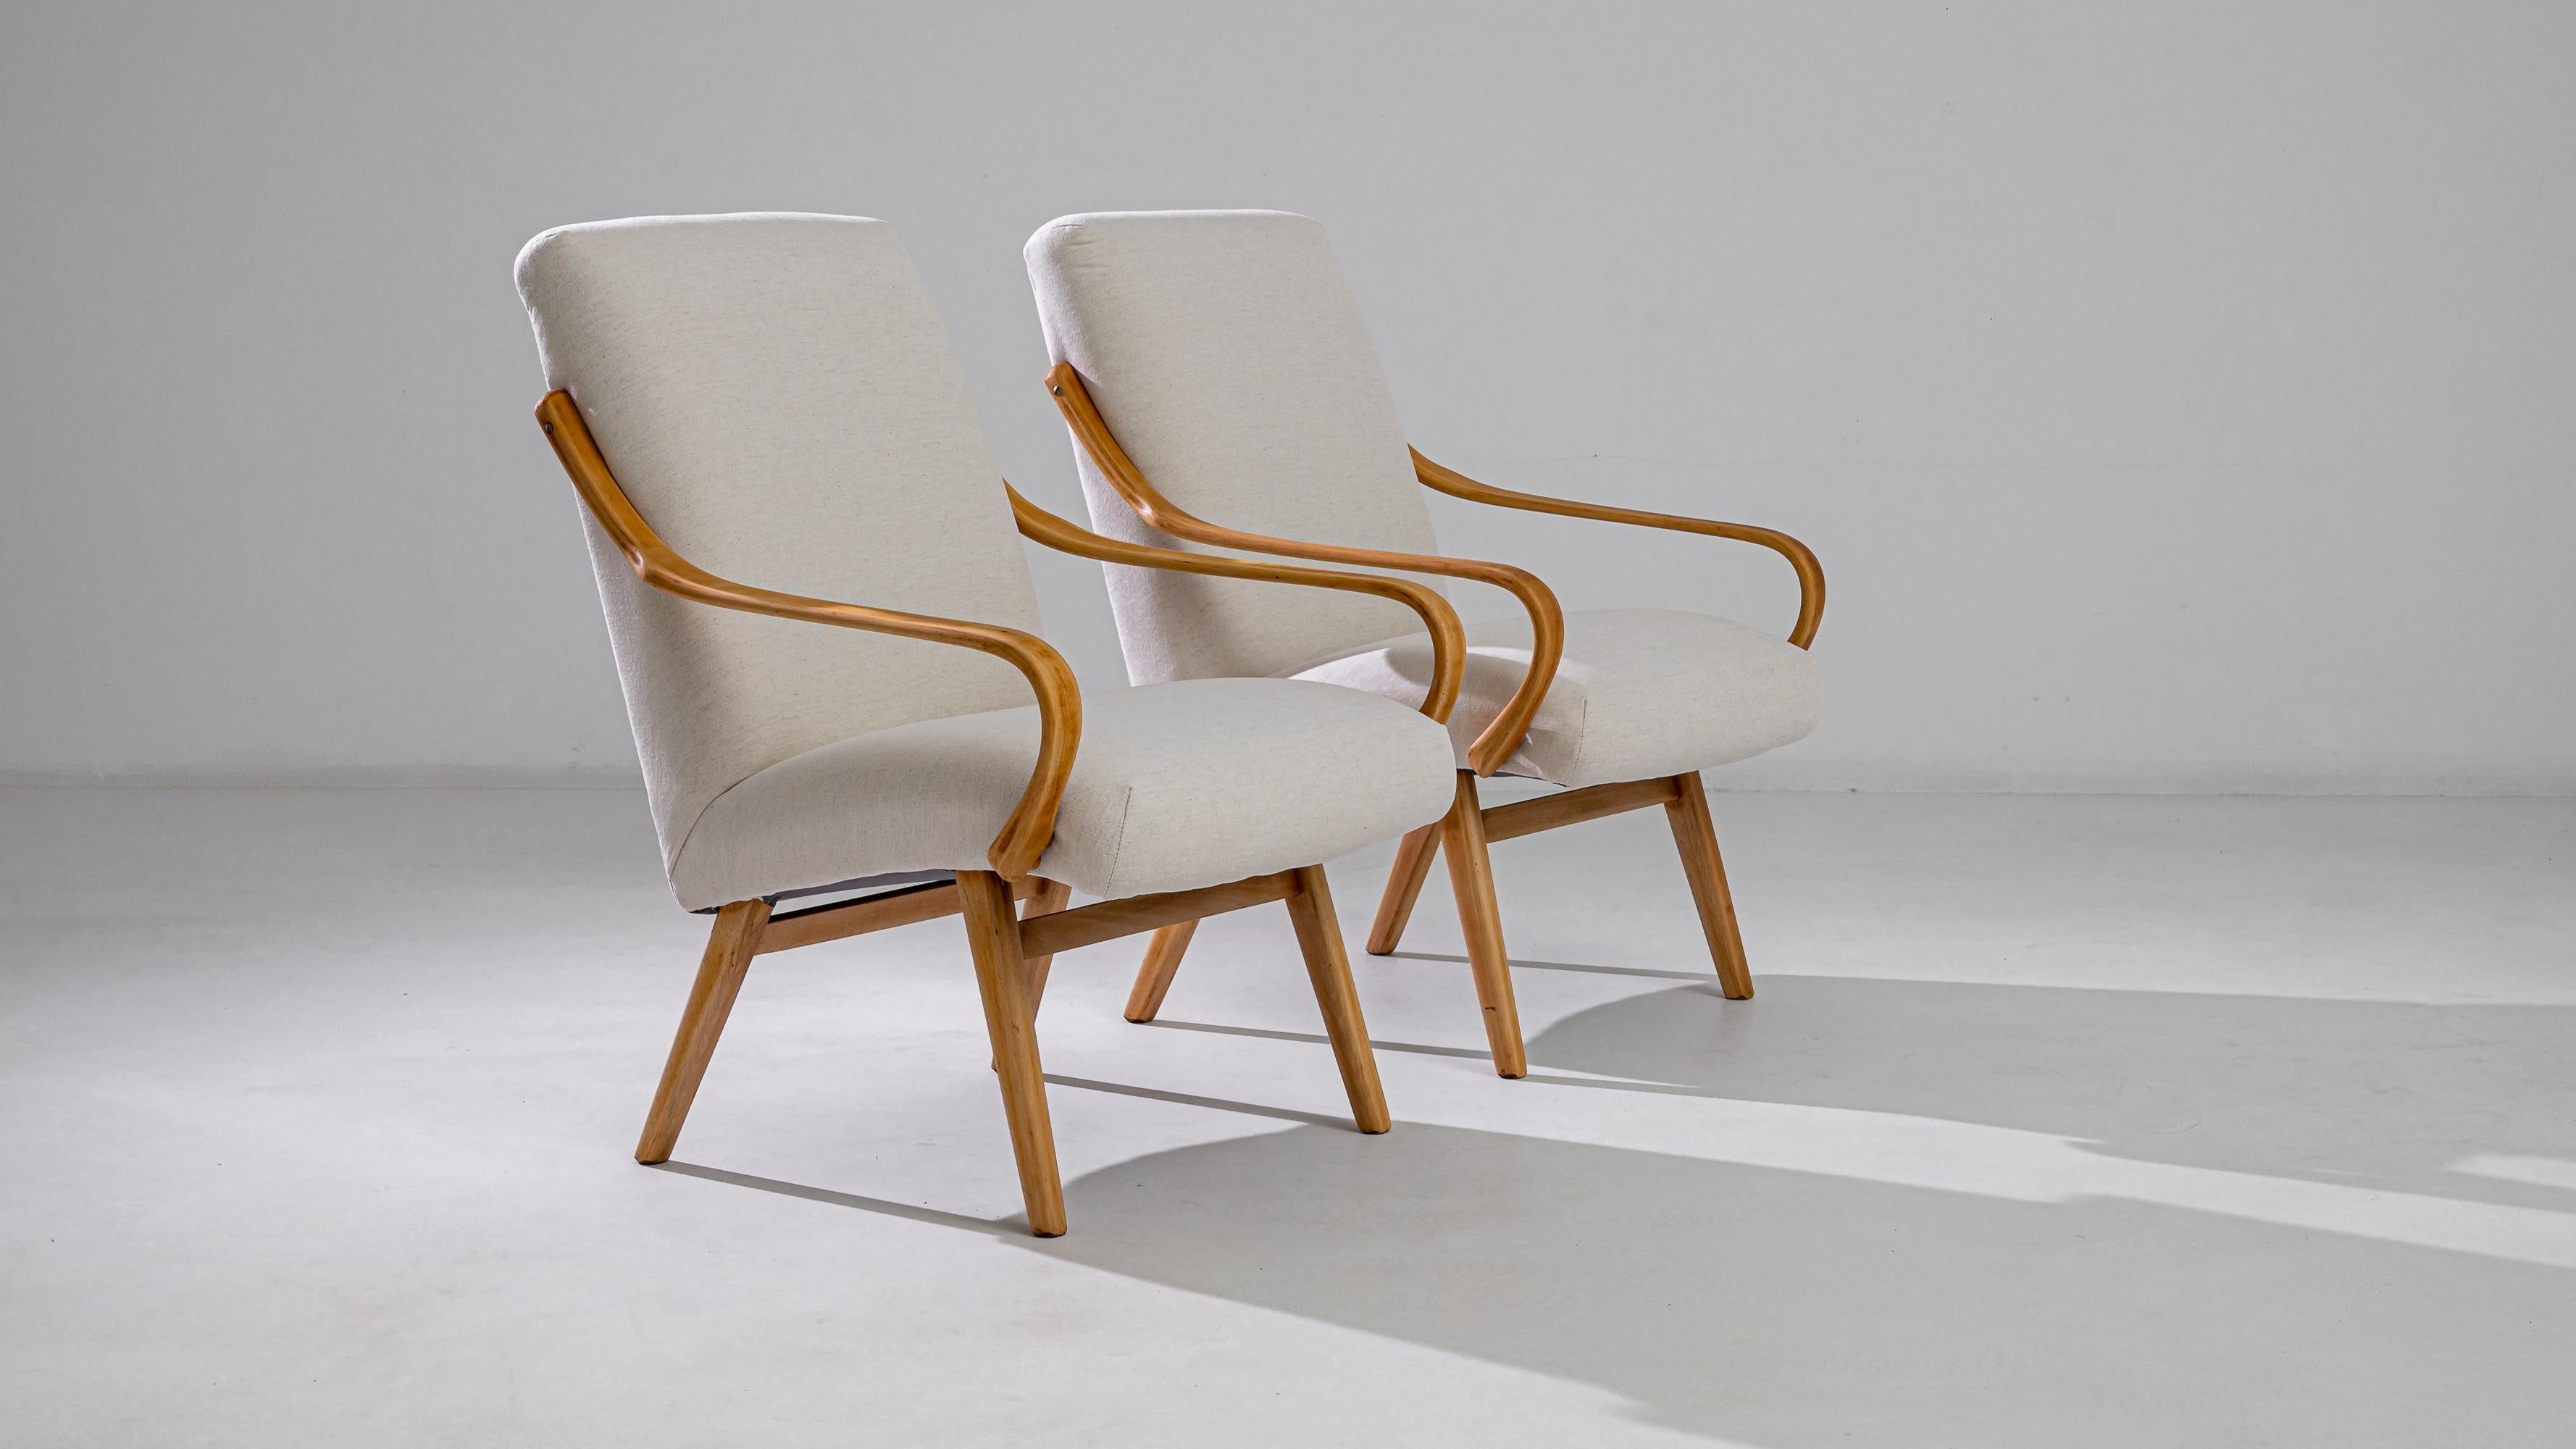 Produced in the former Czechoslovakia, this pair of armchairs from circa 1960 are re-upholstered with an updated natural white fabric, chosen to compliment the elegant polish of the hardwood frame. Comfortable angles and clean lines are designed to